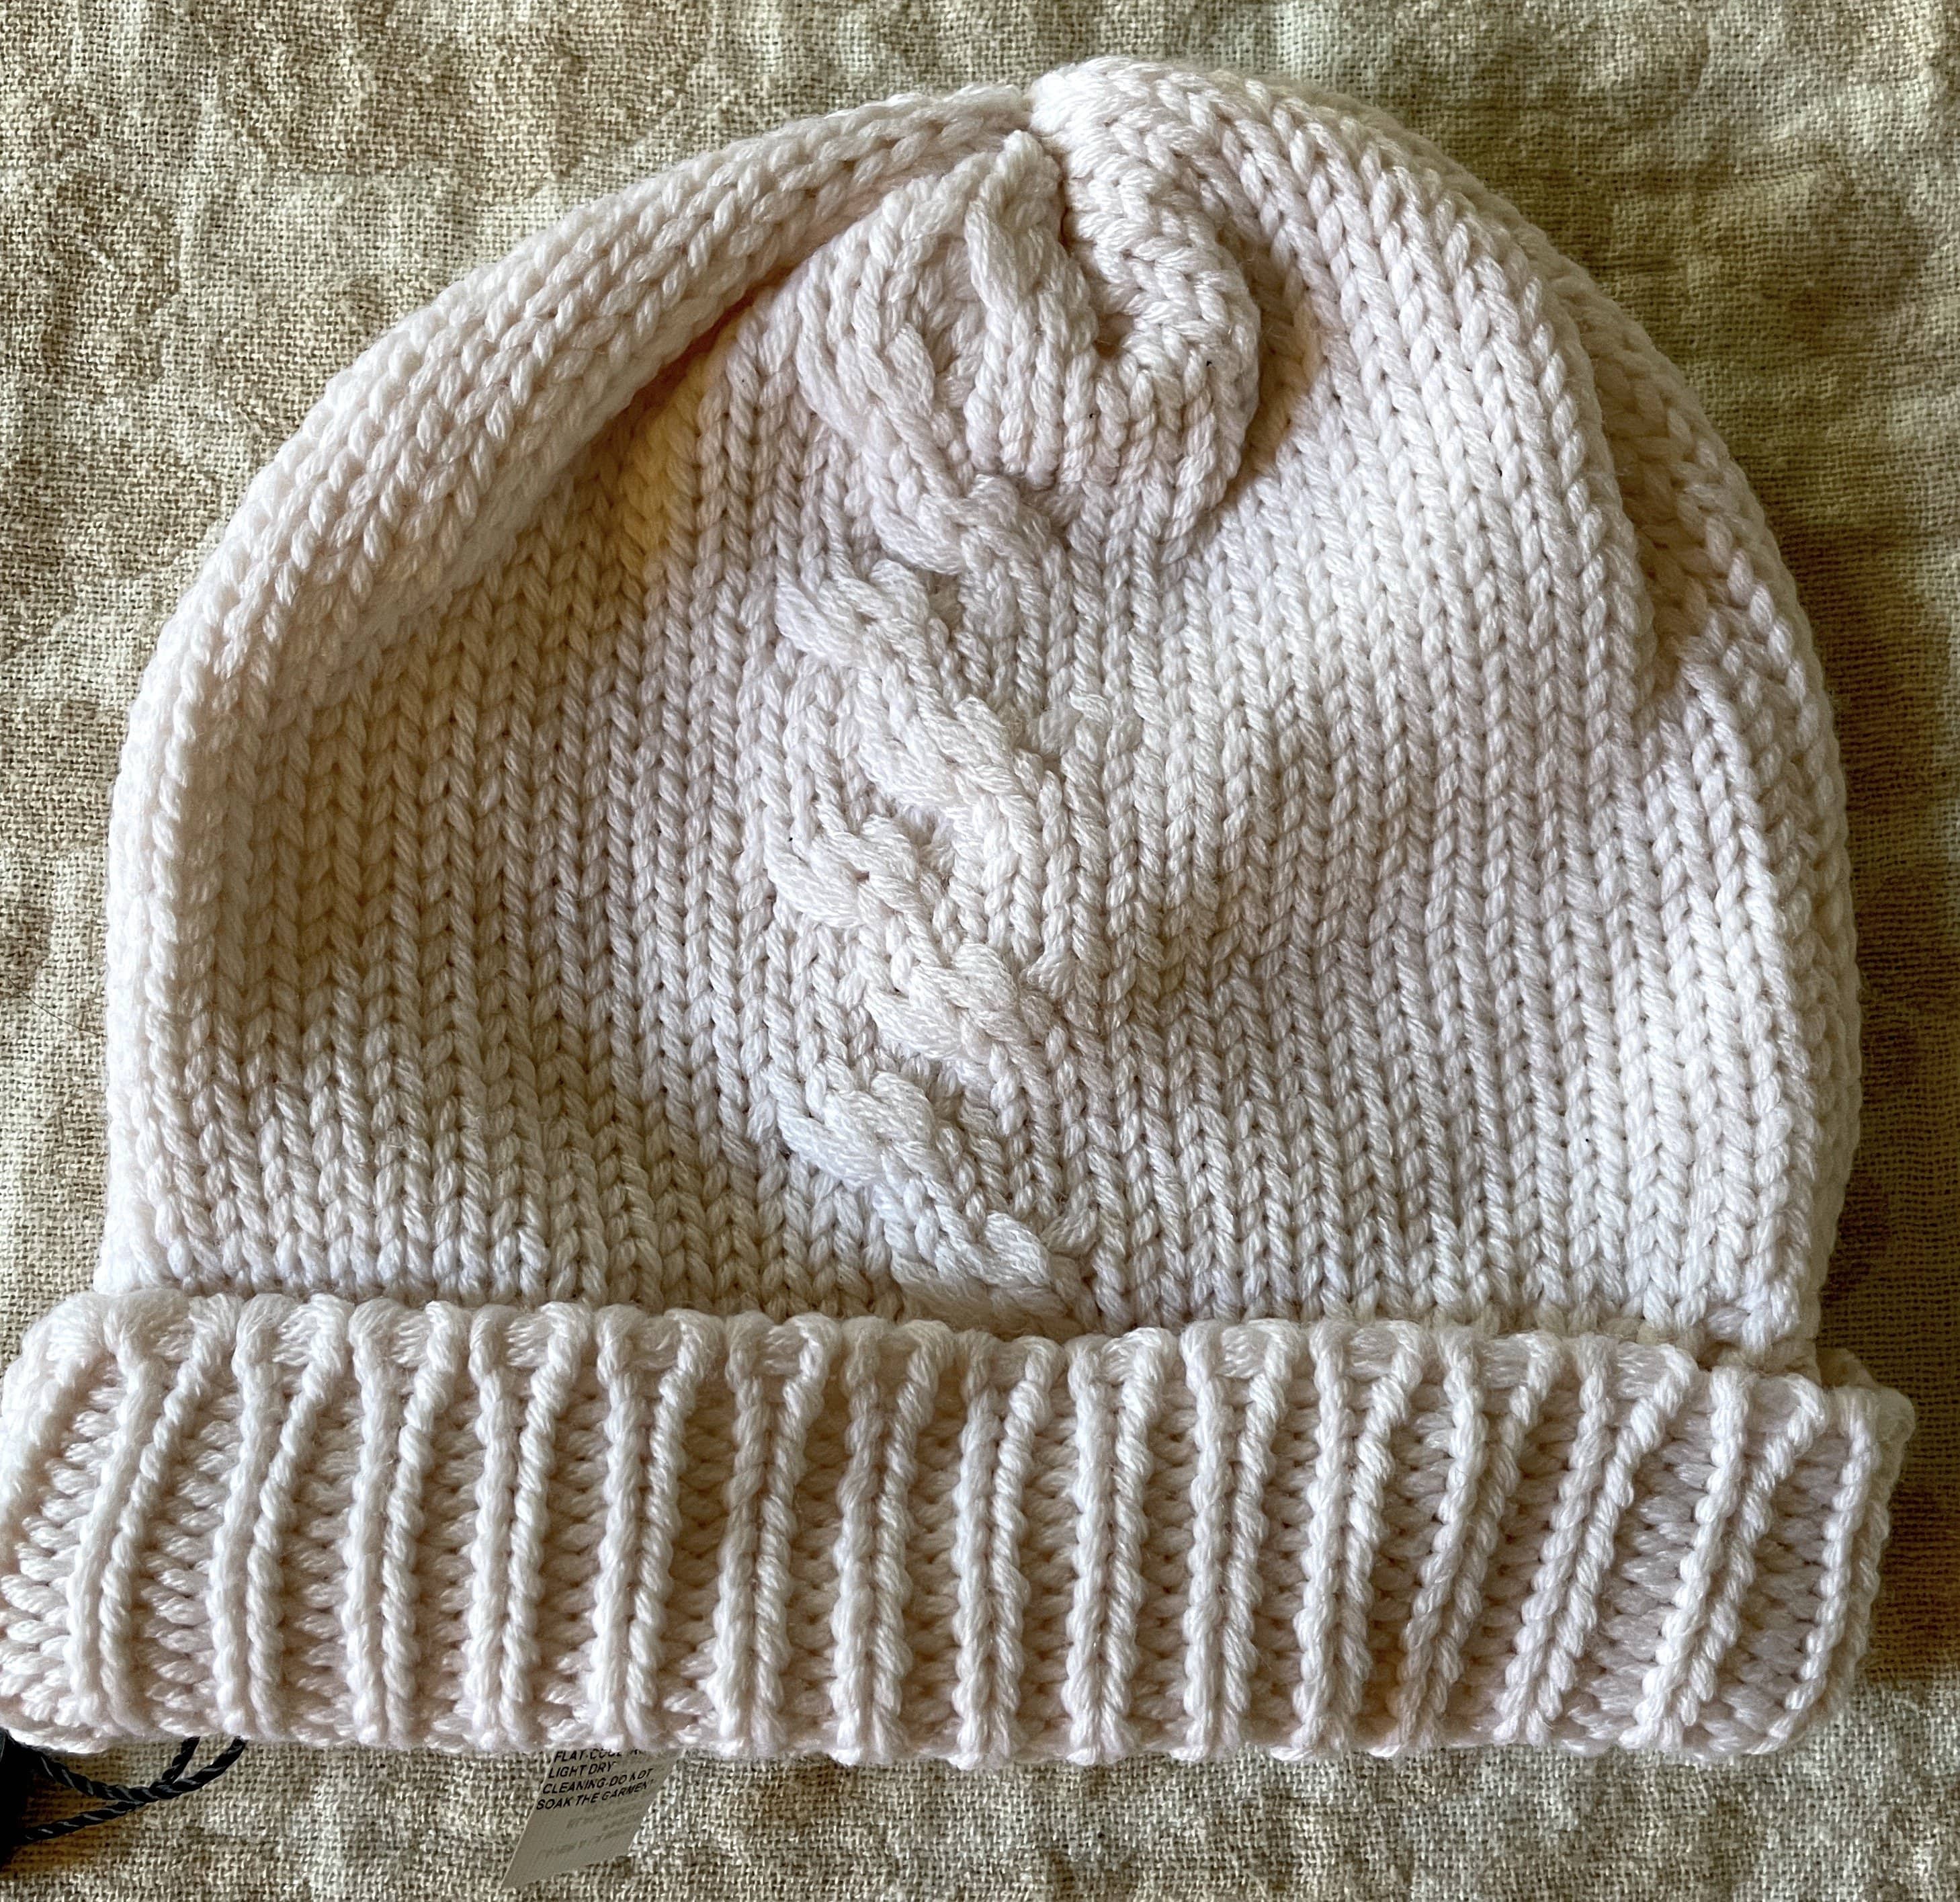 Kids Dolce & Gabbana Wool and Cashmere Toddler hat NWT